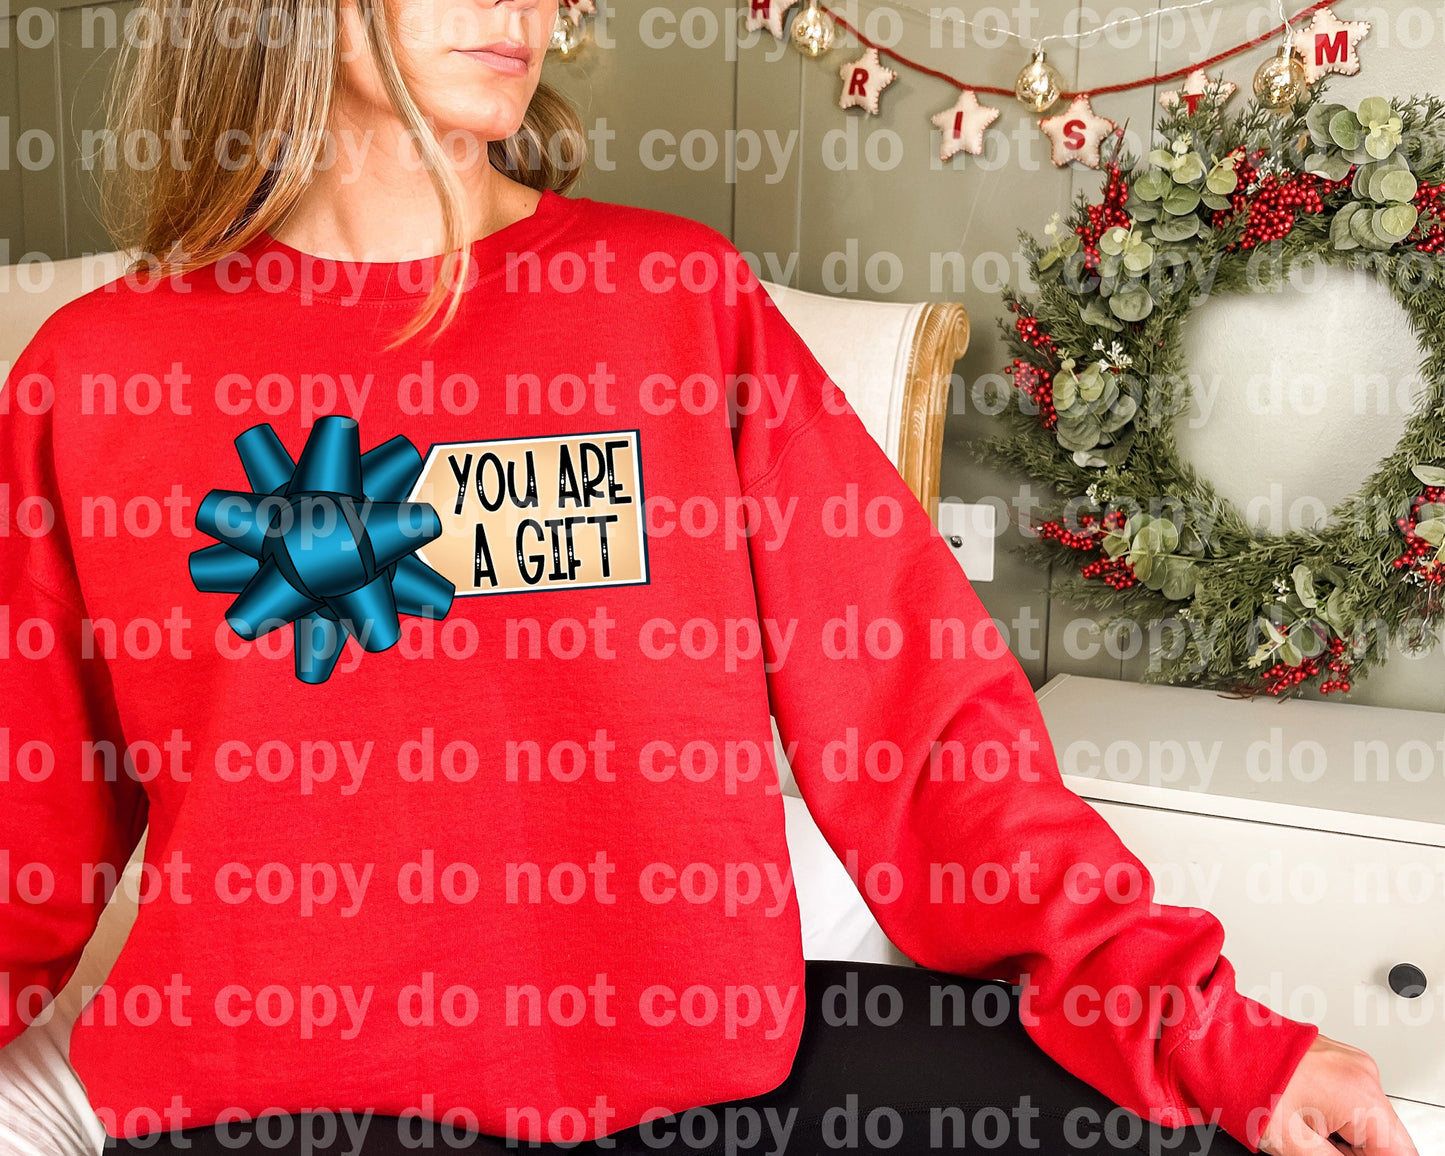 You Are A Gift Dream Print or Sublimation Print